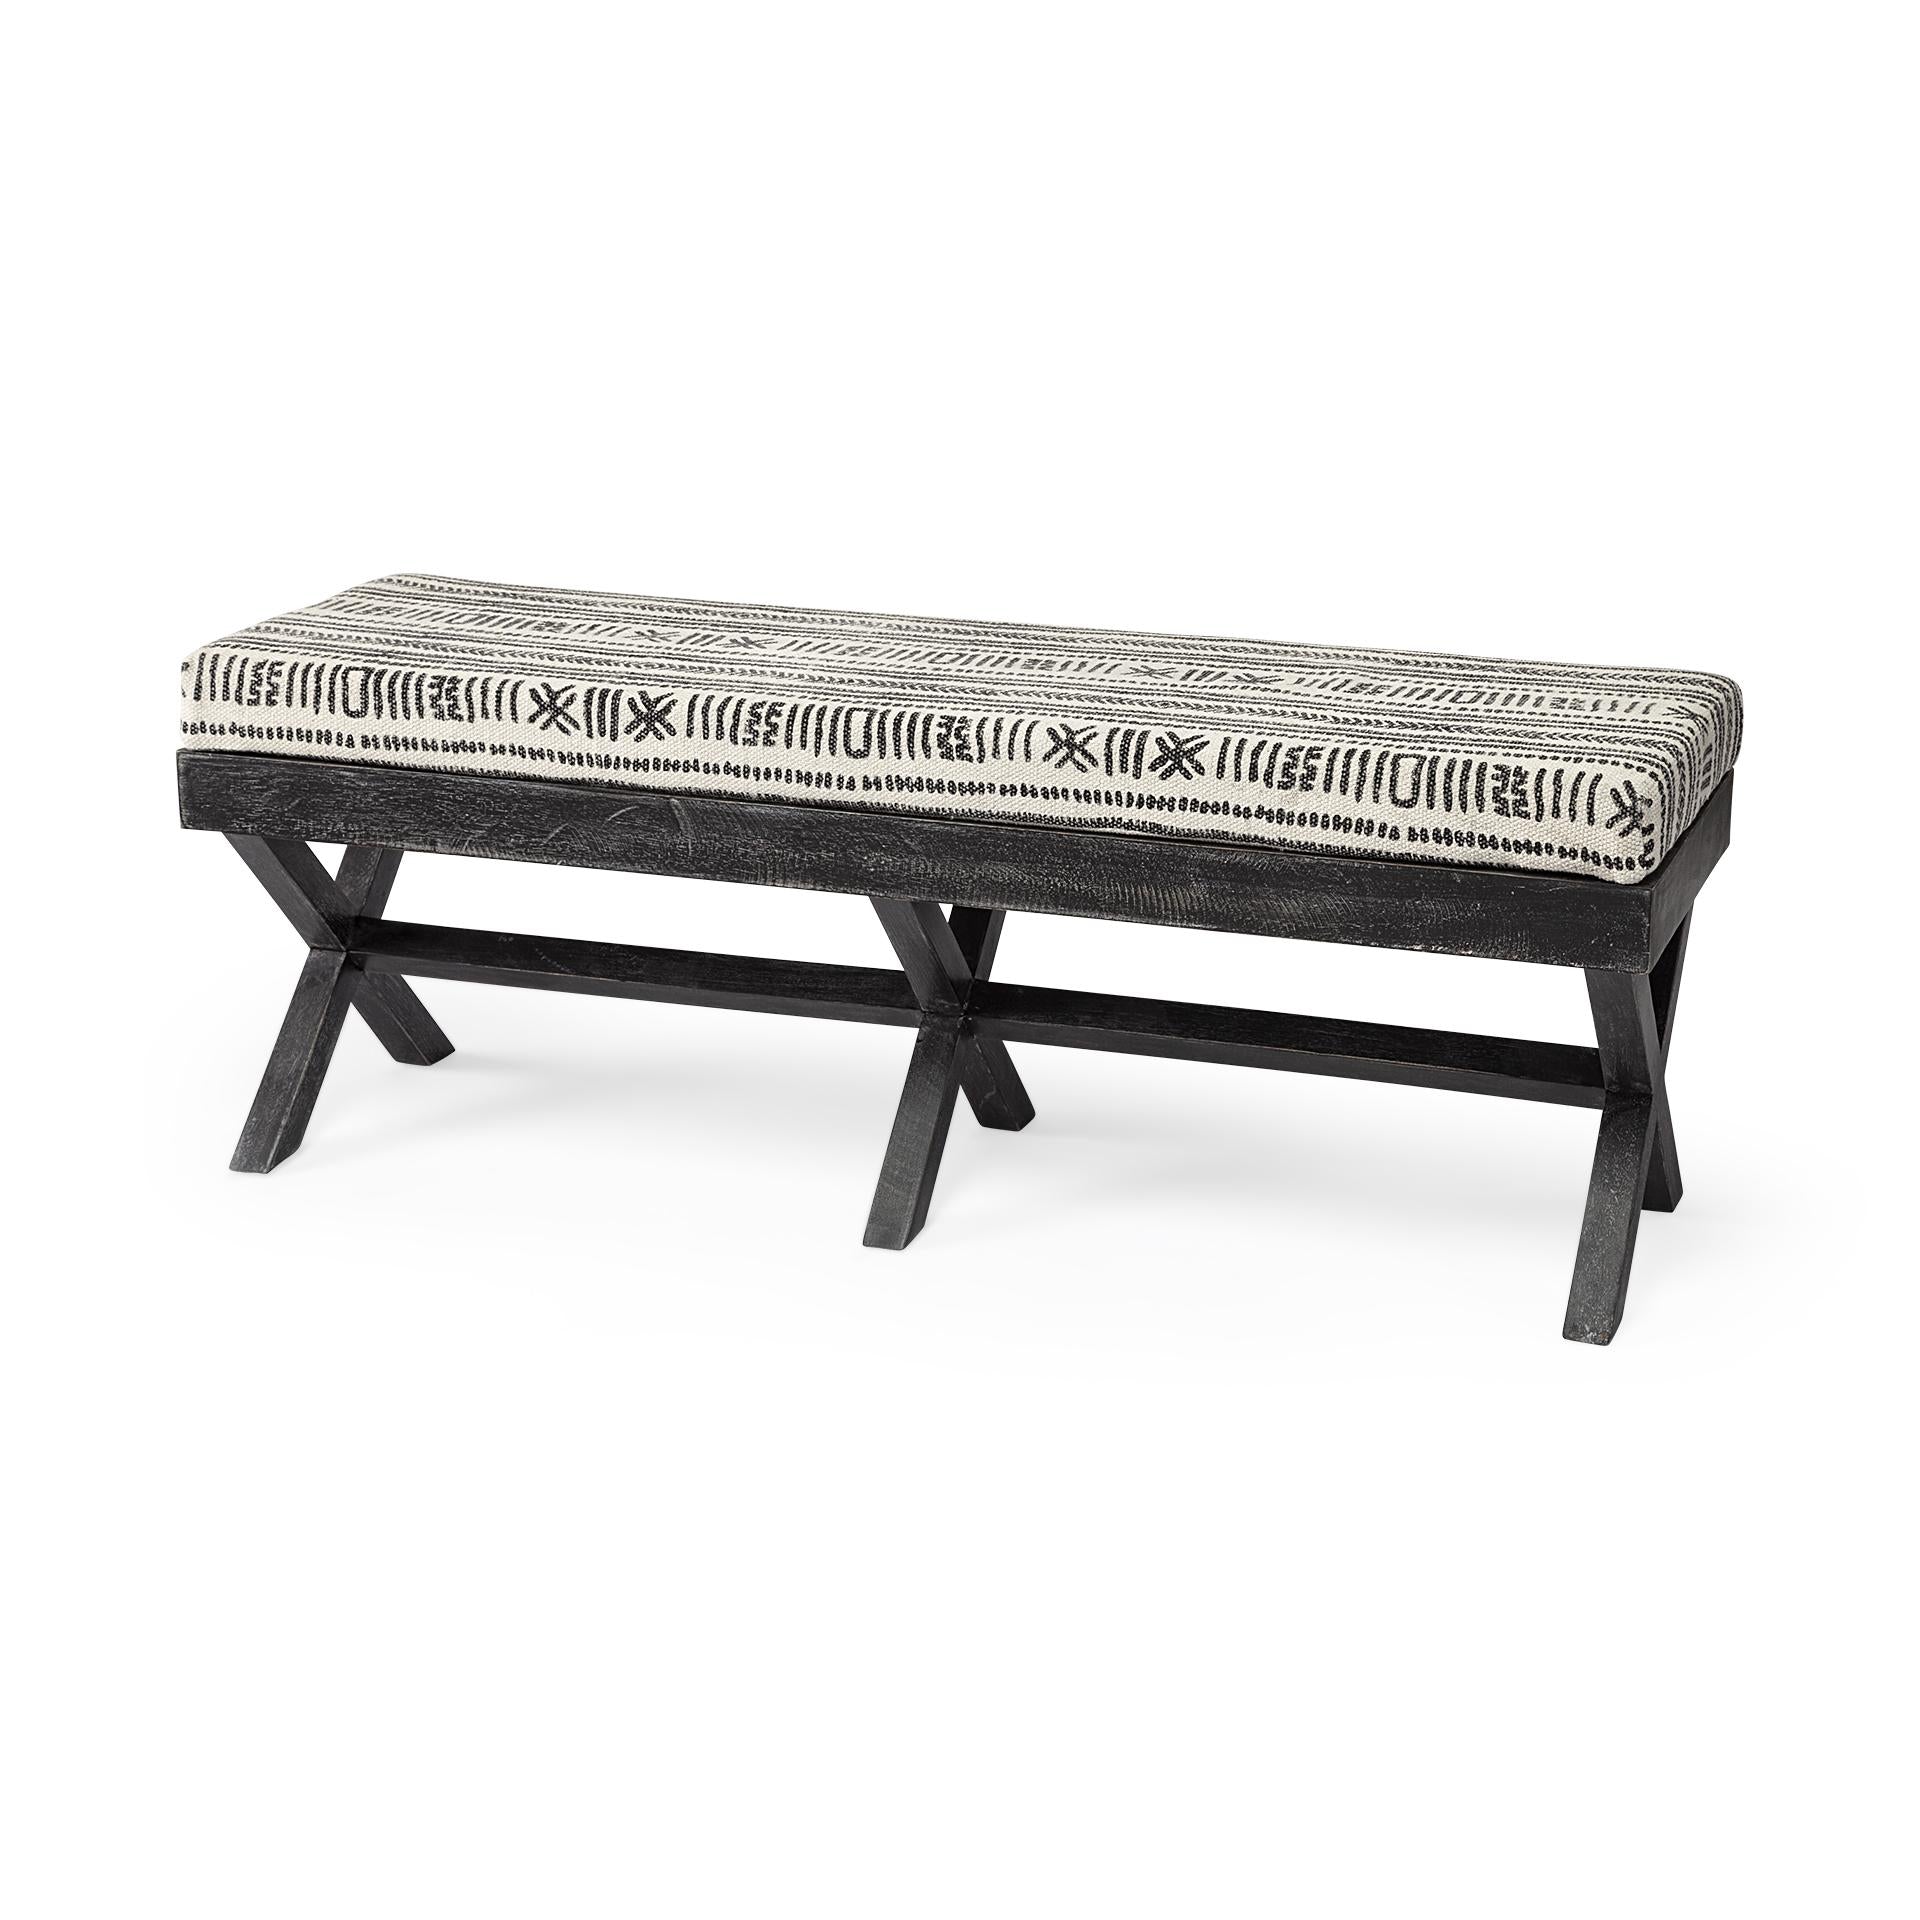 Rectangular Indian Mango WoodDark-Brown Finish W Upholstered Gray And White Patterned Seat Accent Bench